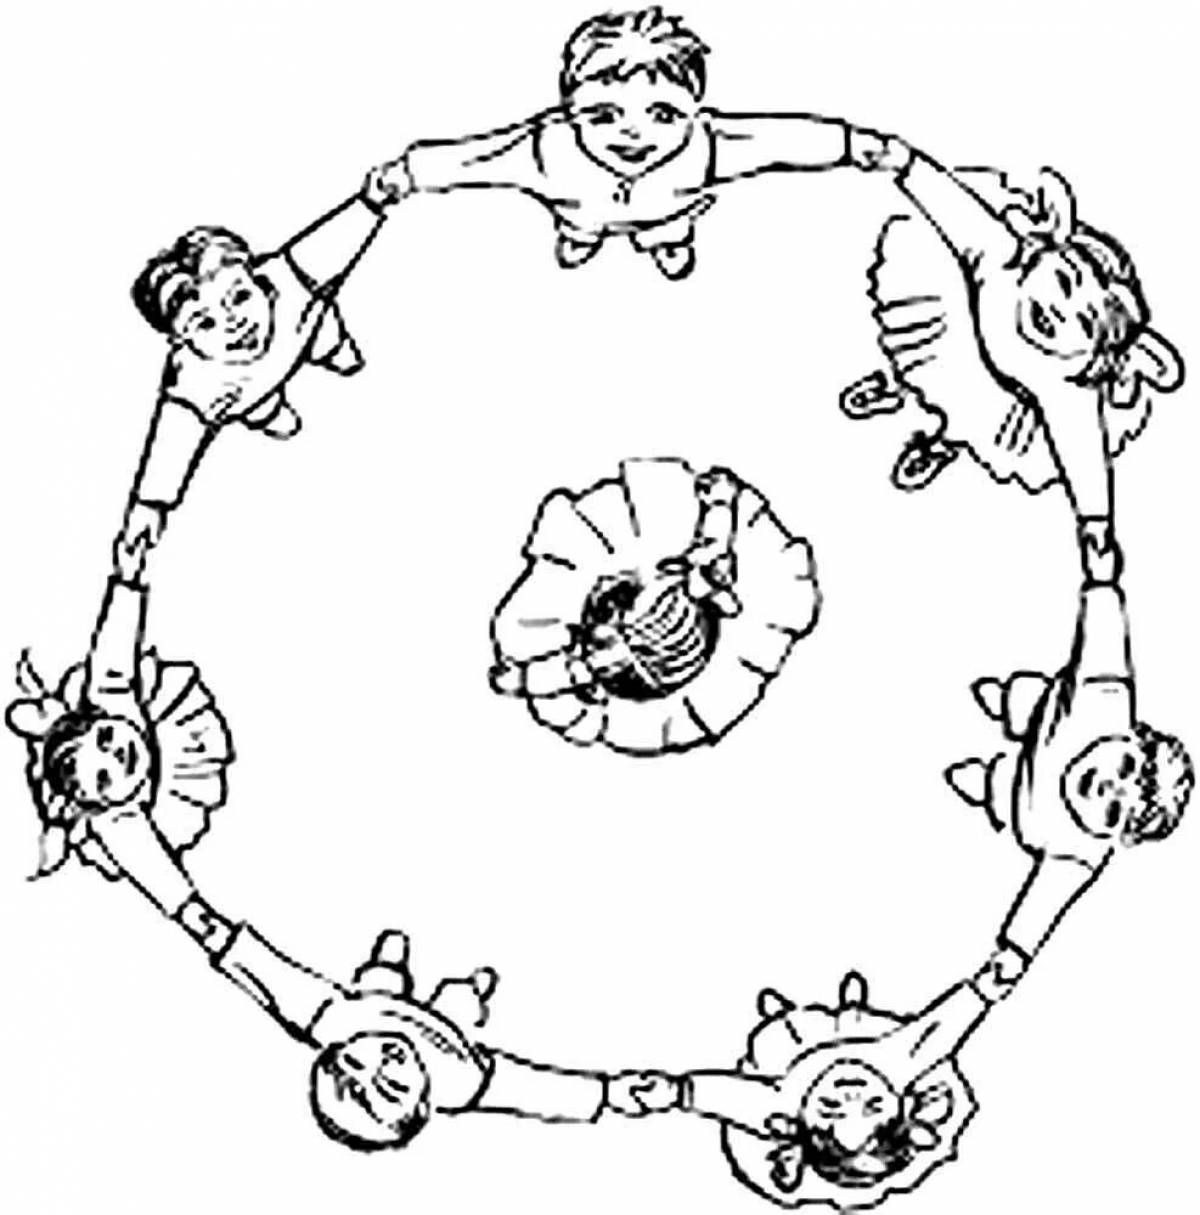 Children's dance coloring for minors